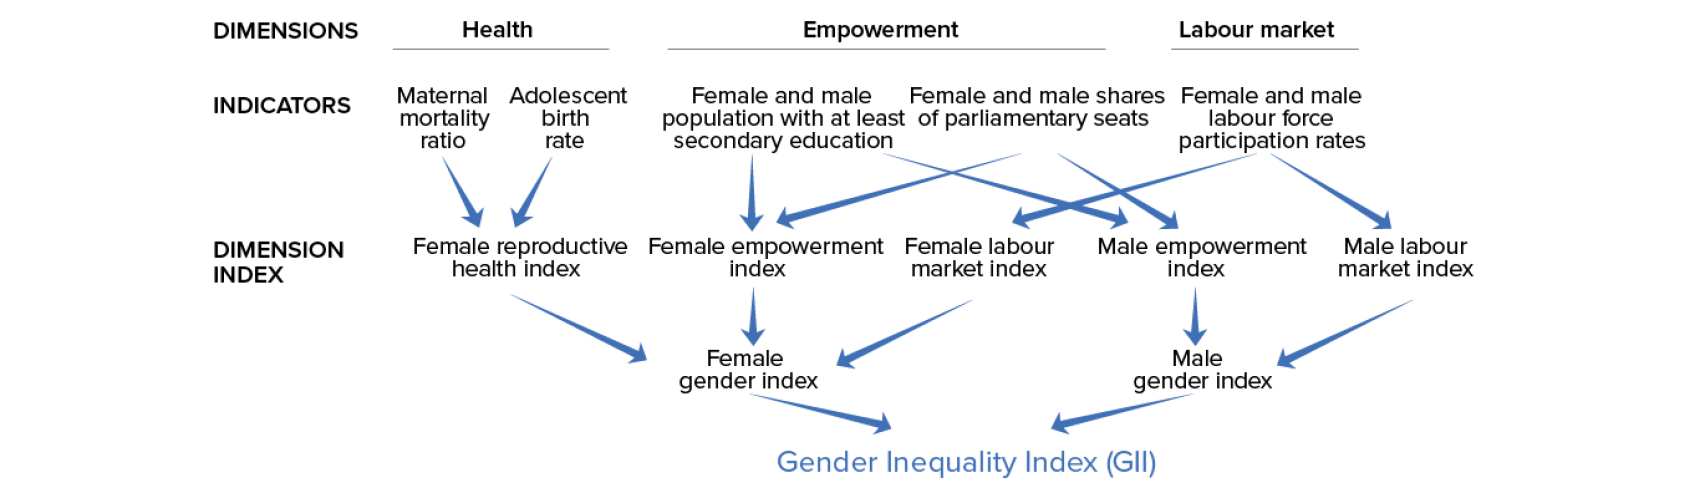 Current Condition And report about gender enequality